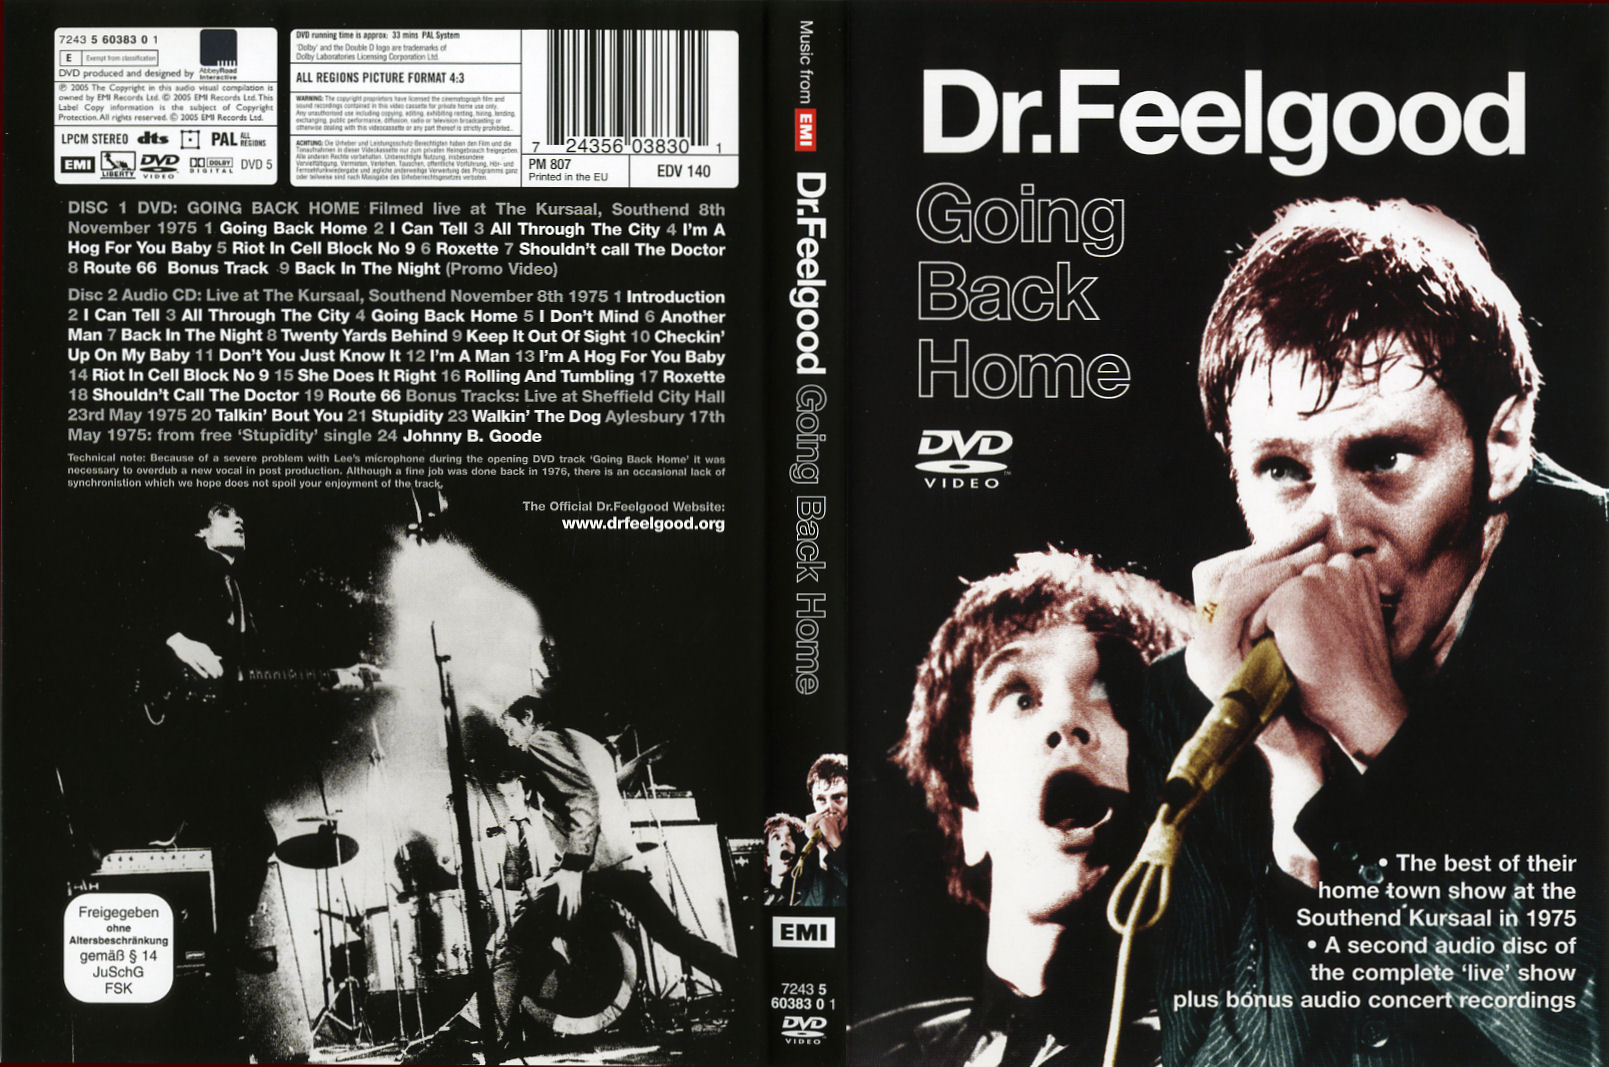 Jaquette DVD Dr Feelgood - Going back home